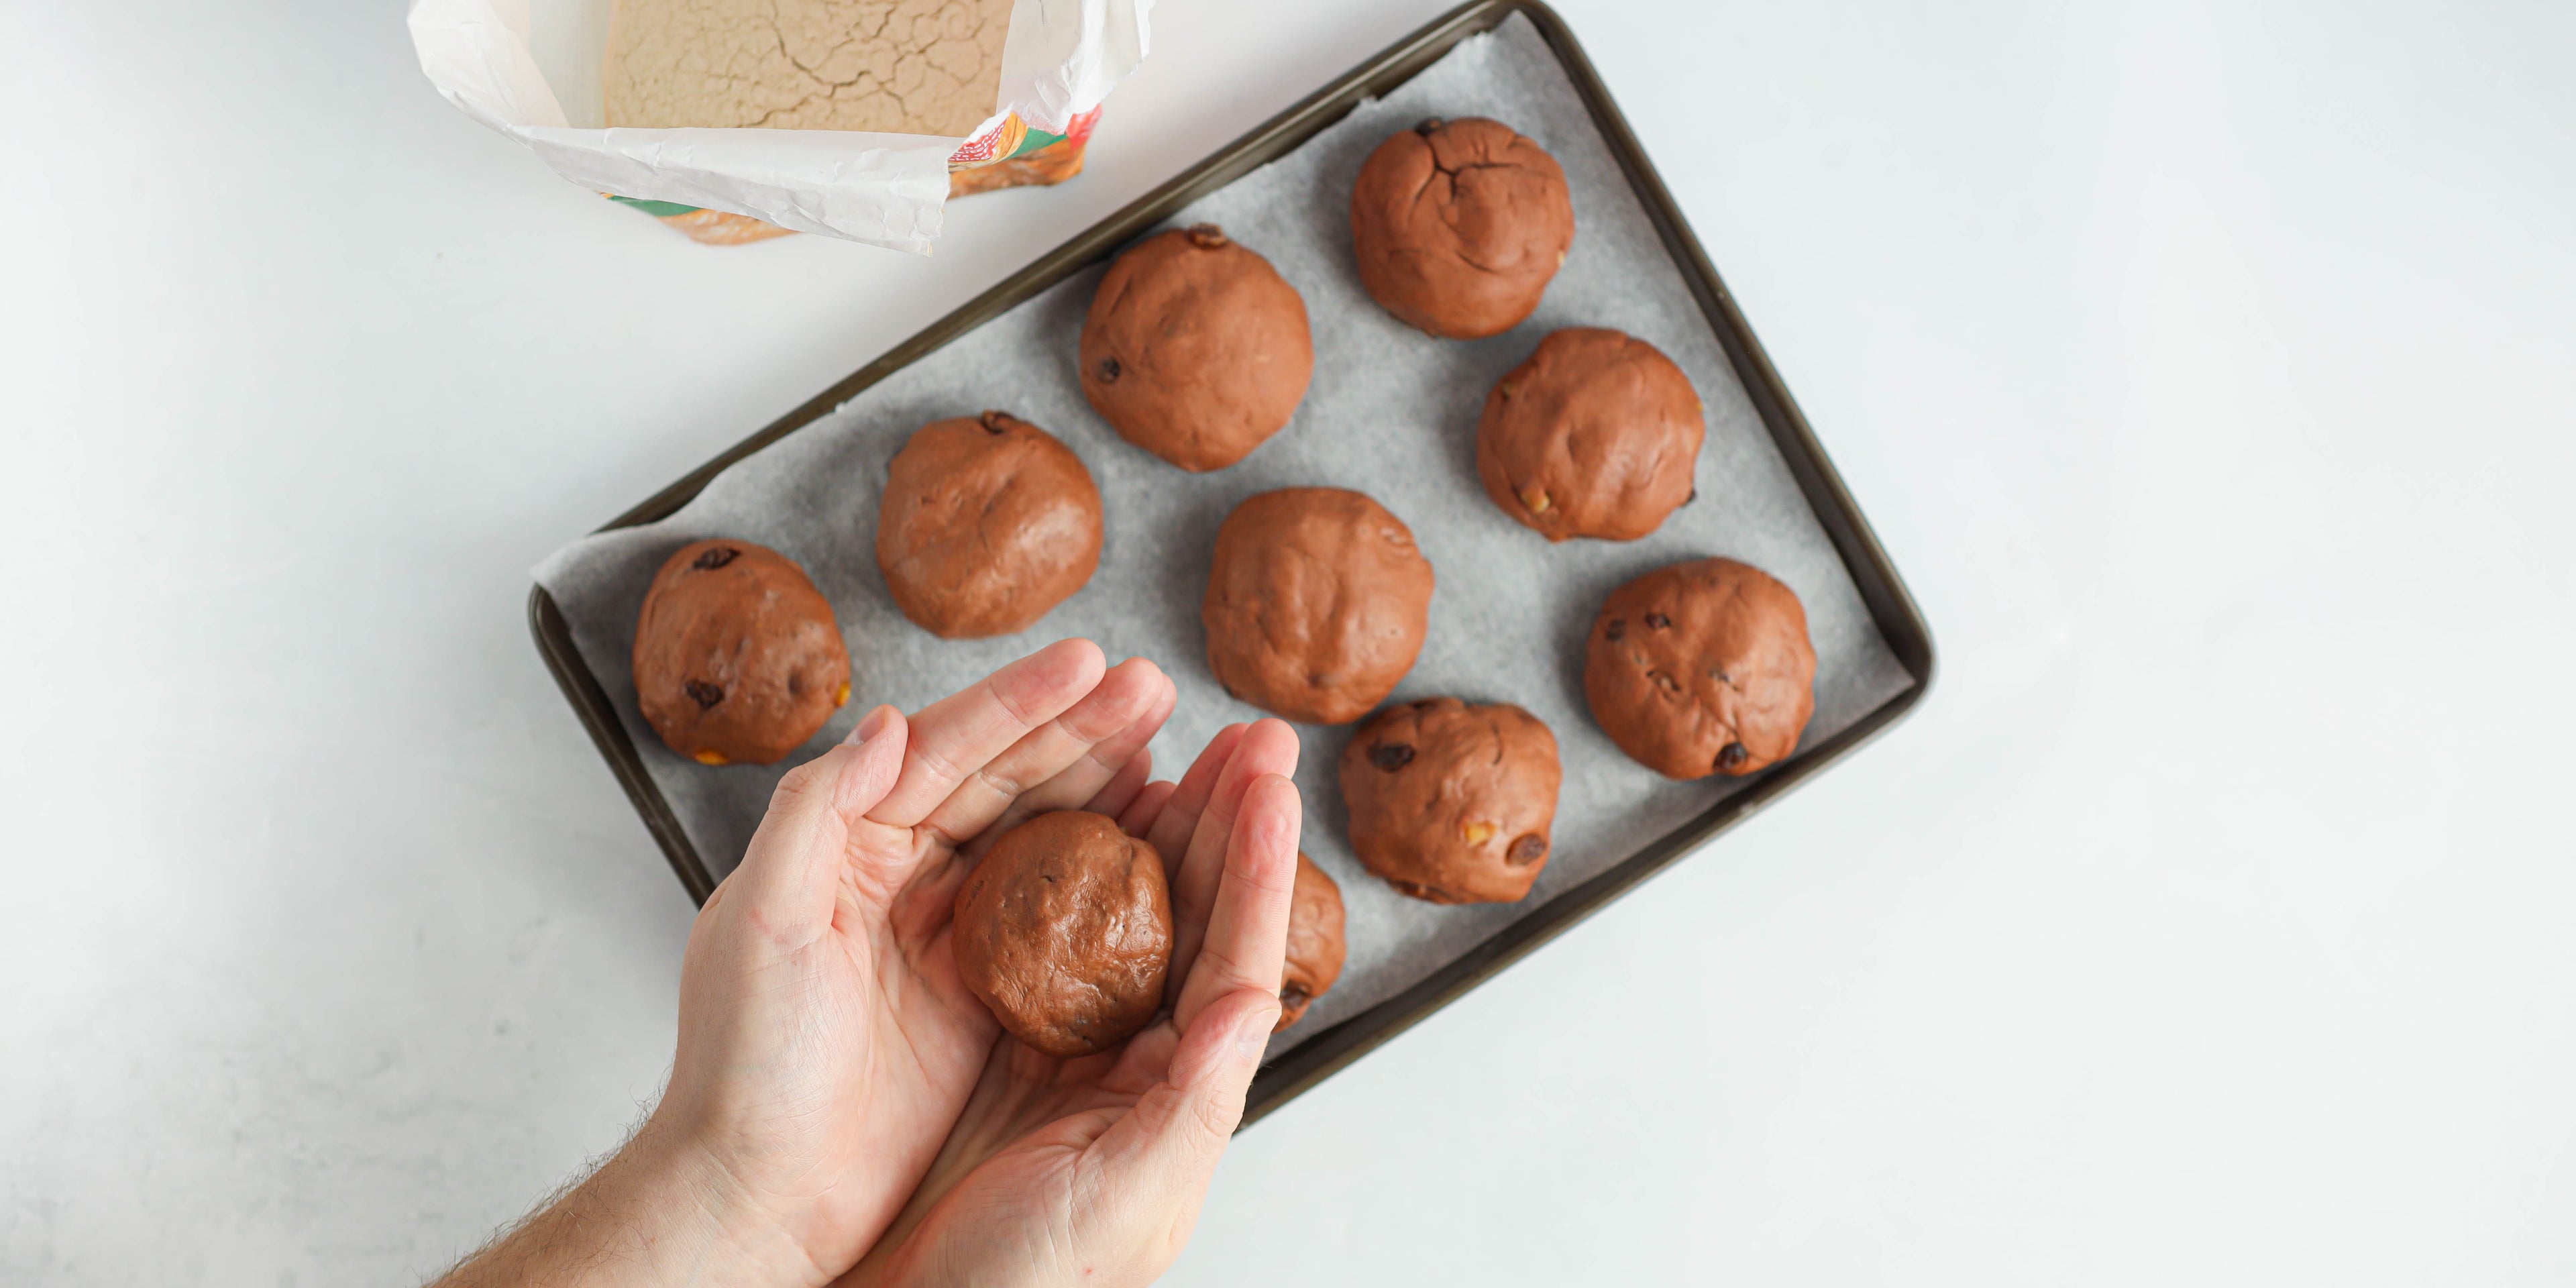 Chocolate Hot Cross Buns being shaped with hands and lay onto a baking tray ready to bake